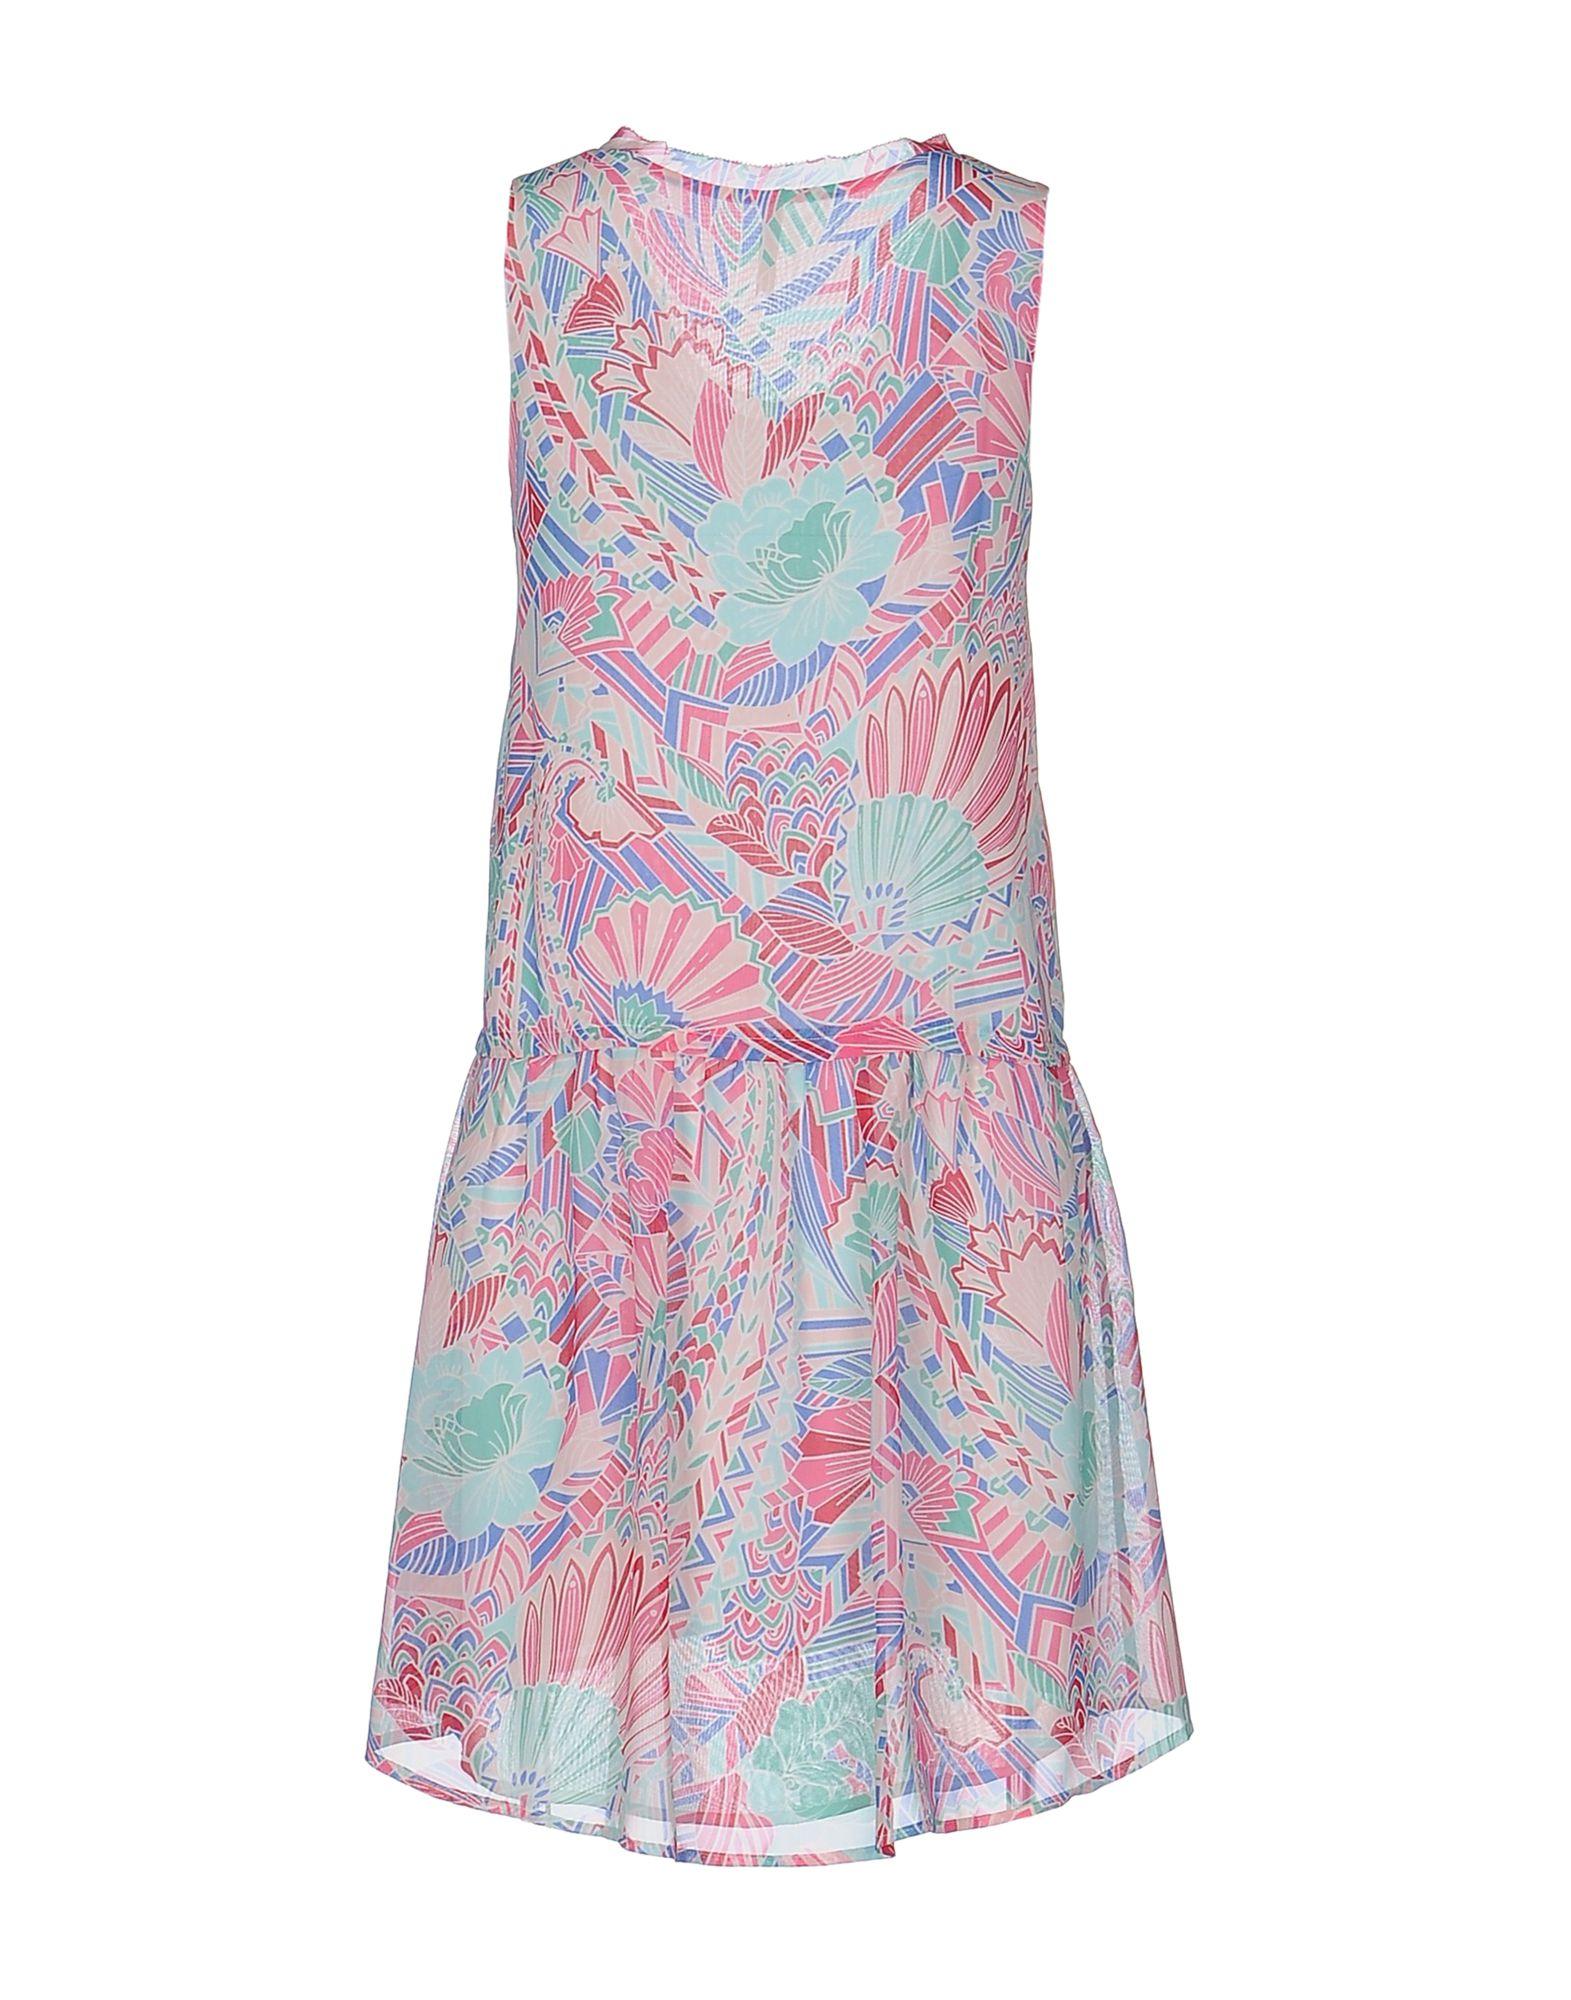 Lyst - Pepe jeans Short Dress in Pink